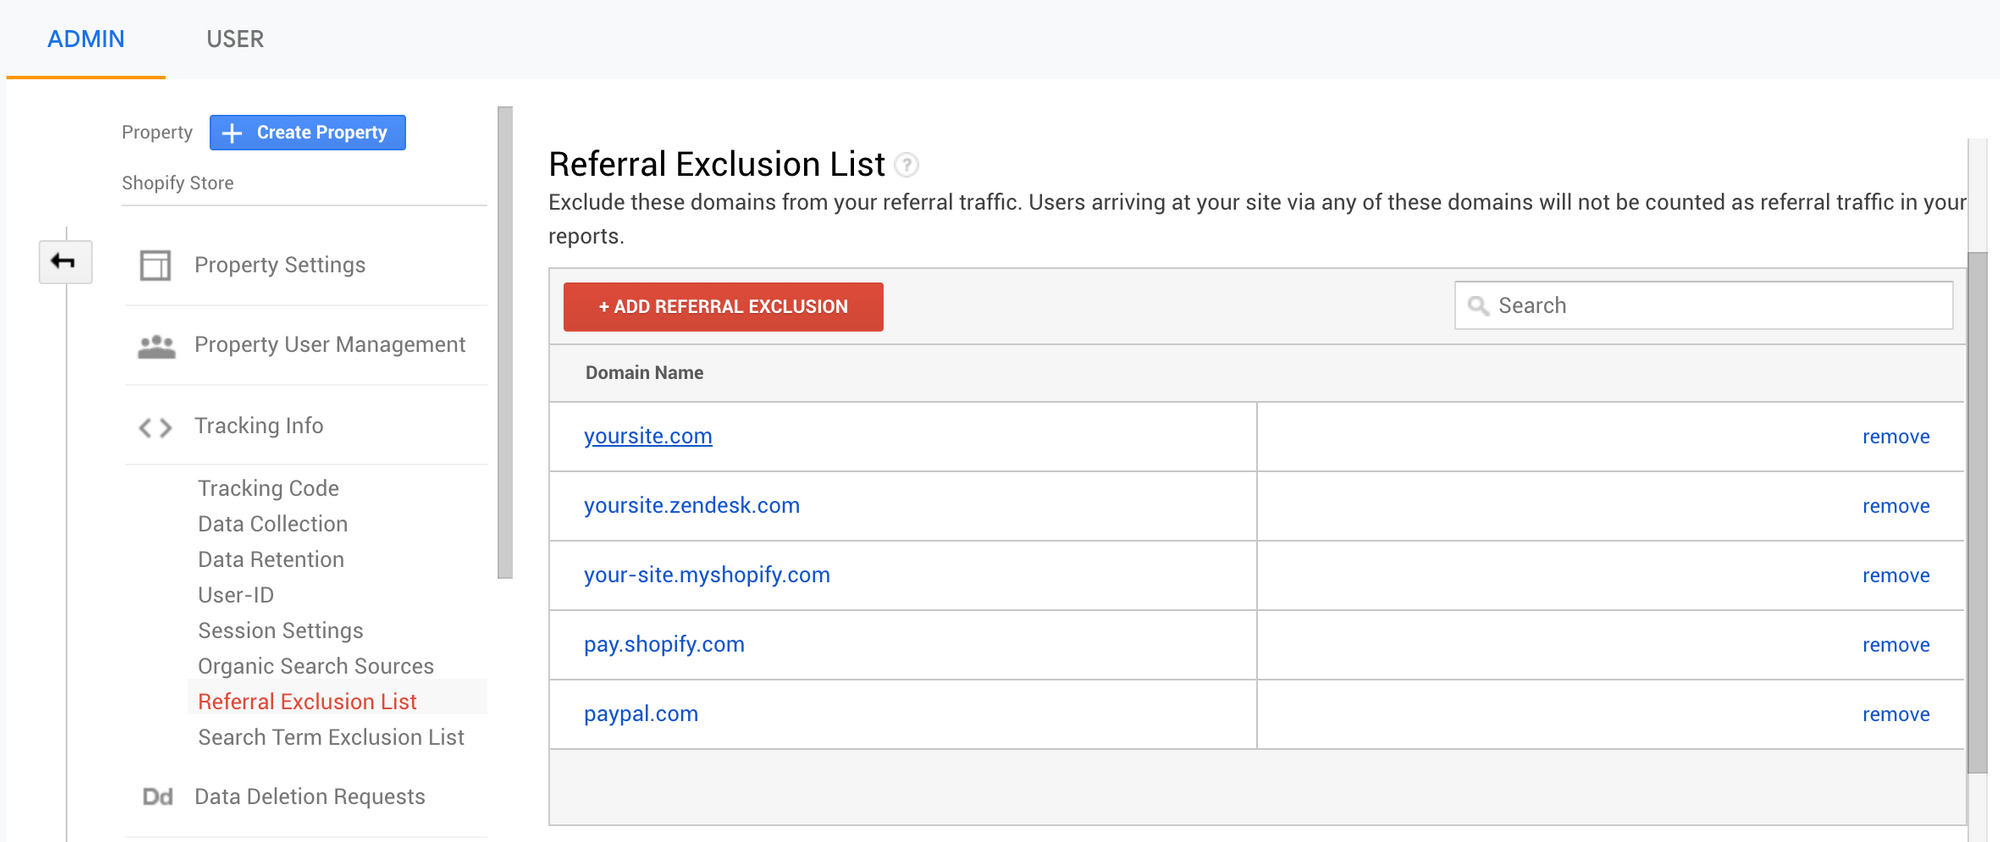 The Referral Exclusion List section of the GA admin panel